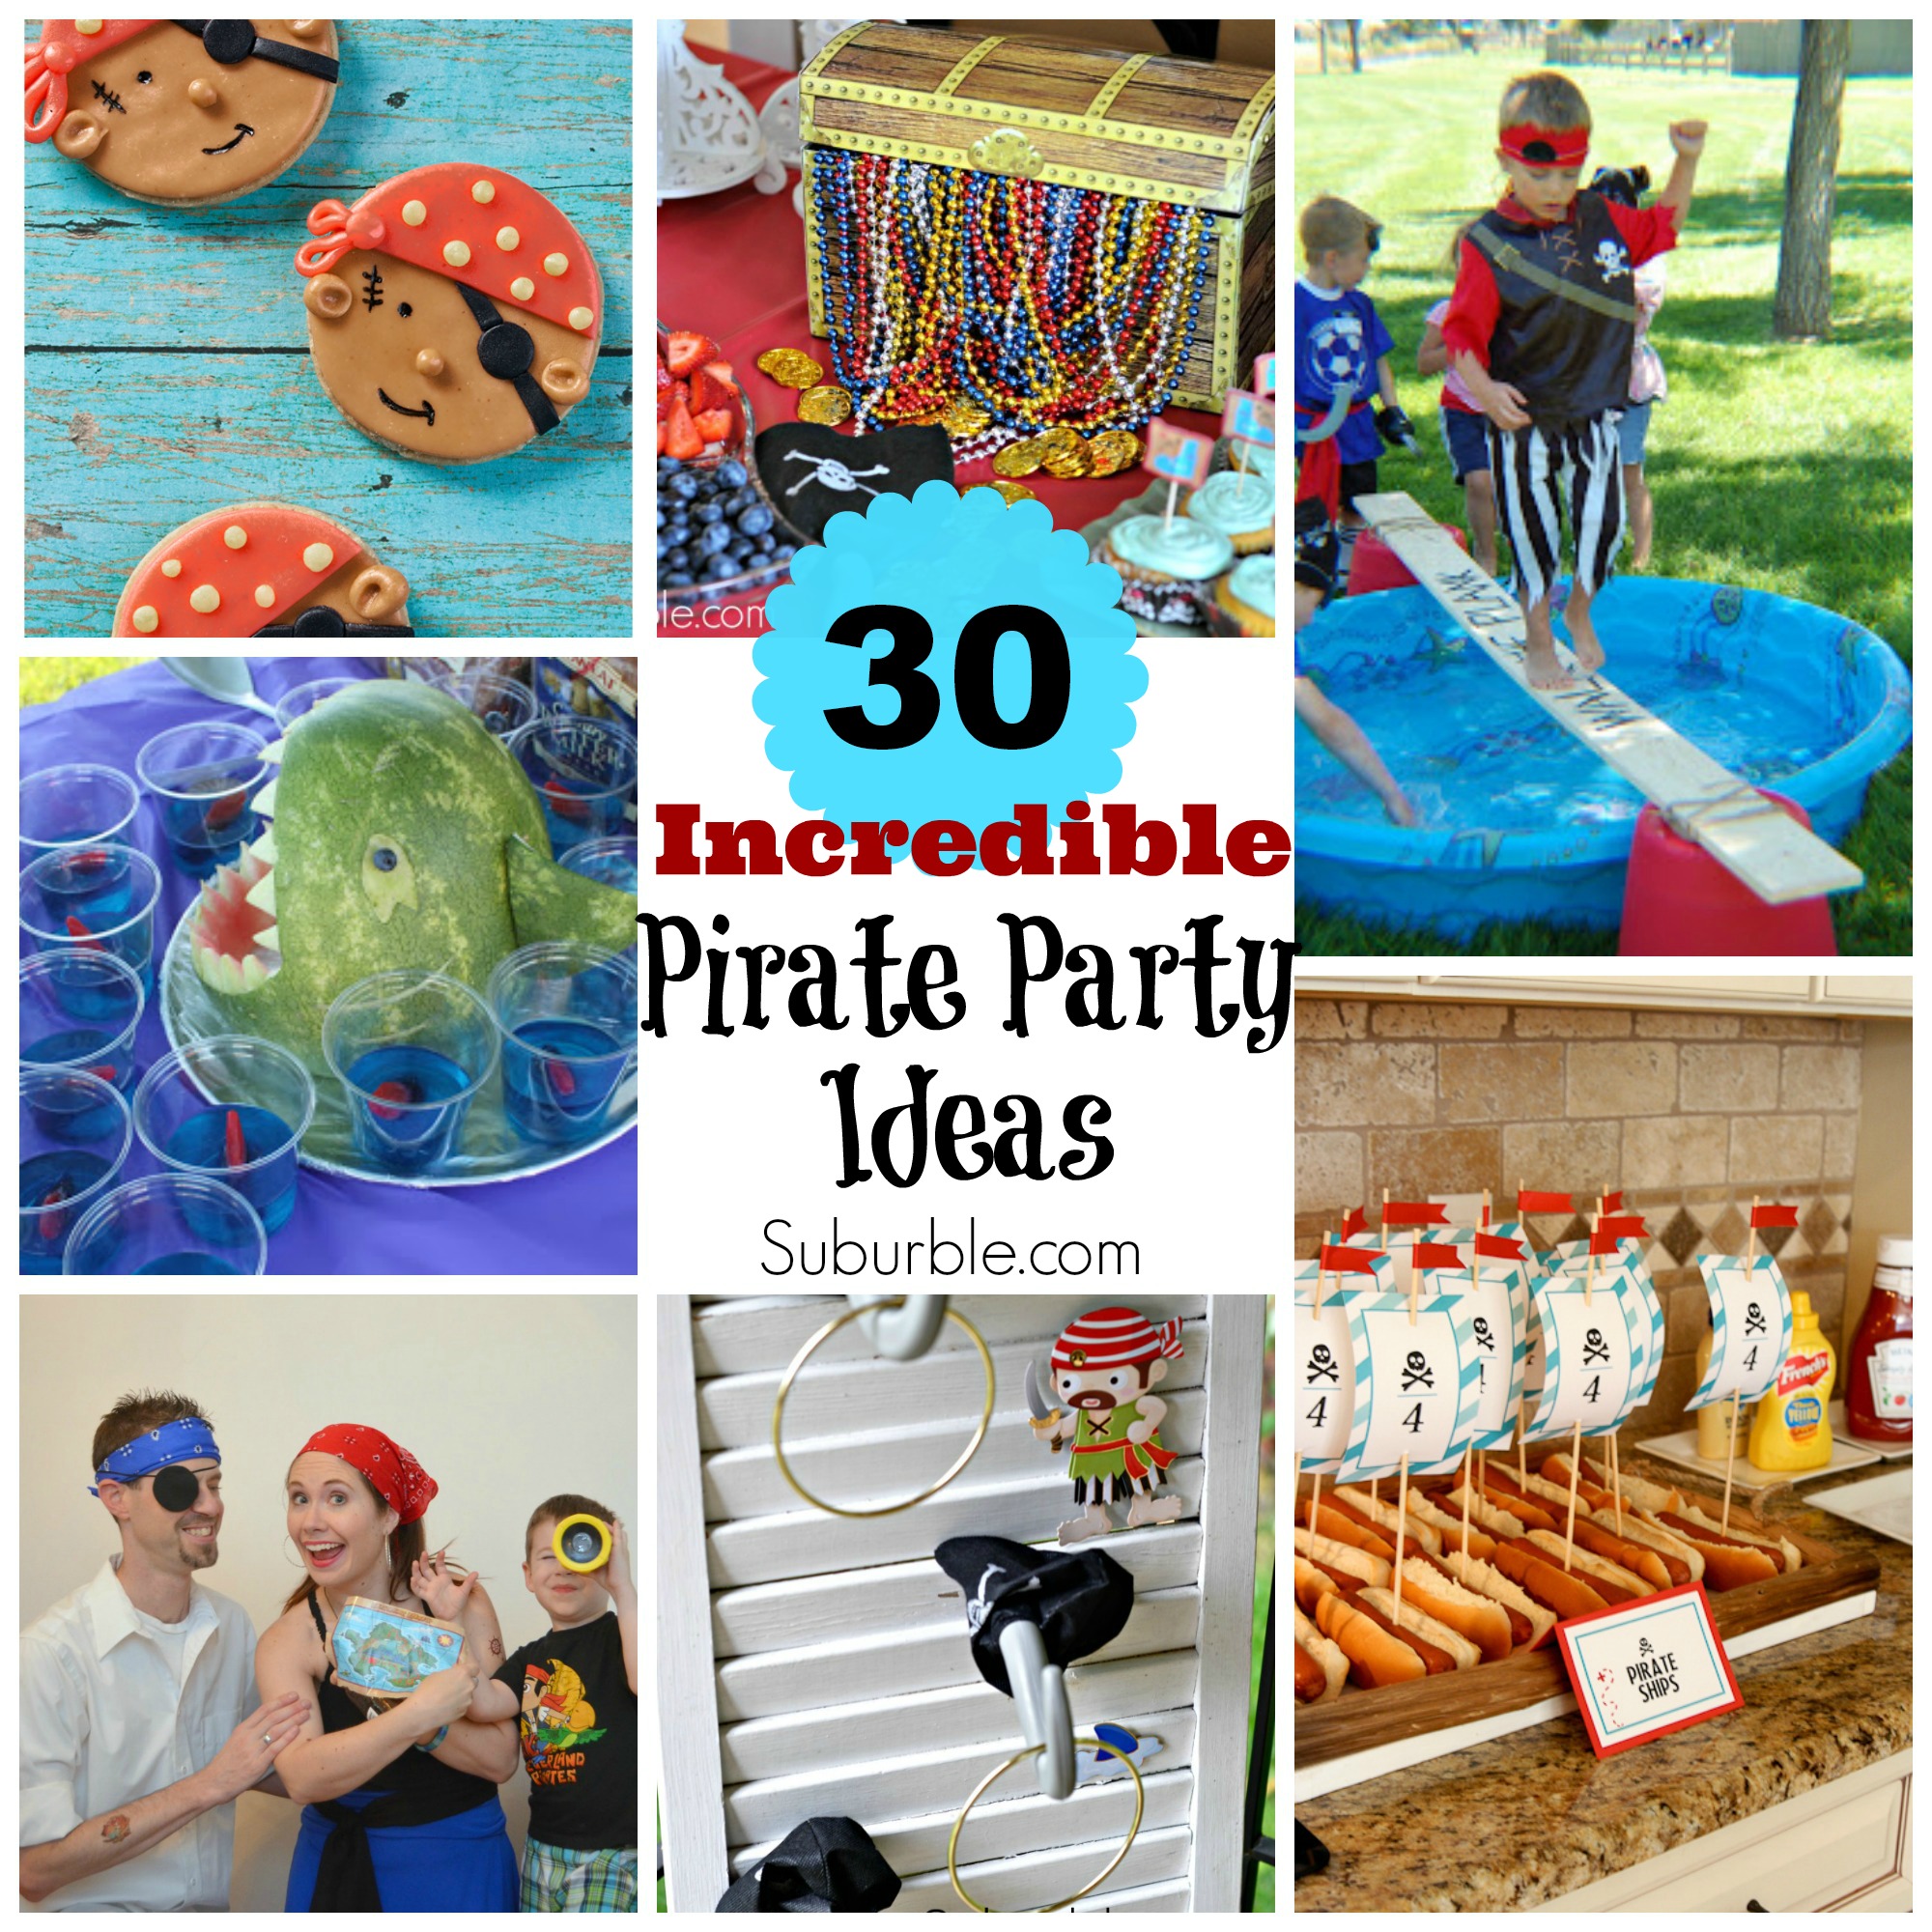 and yer parrot – and start planning your pirate party